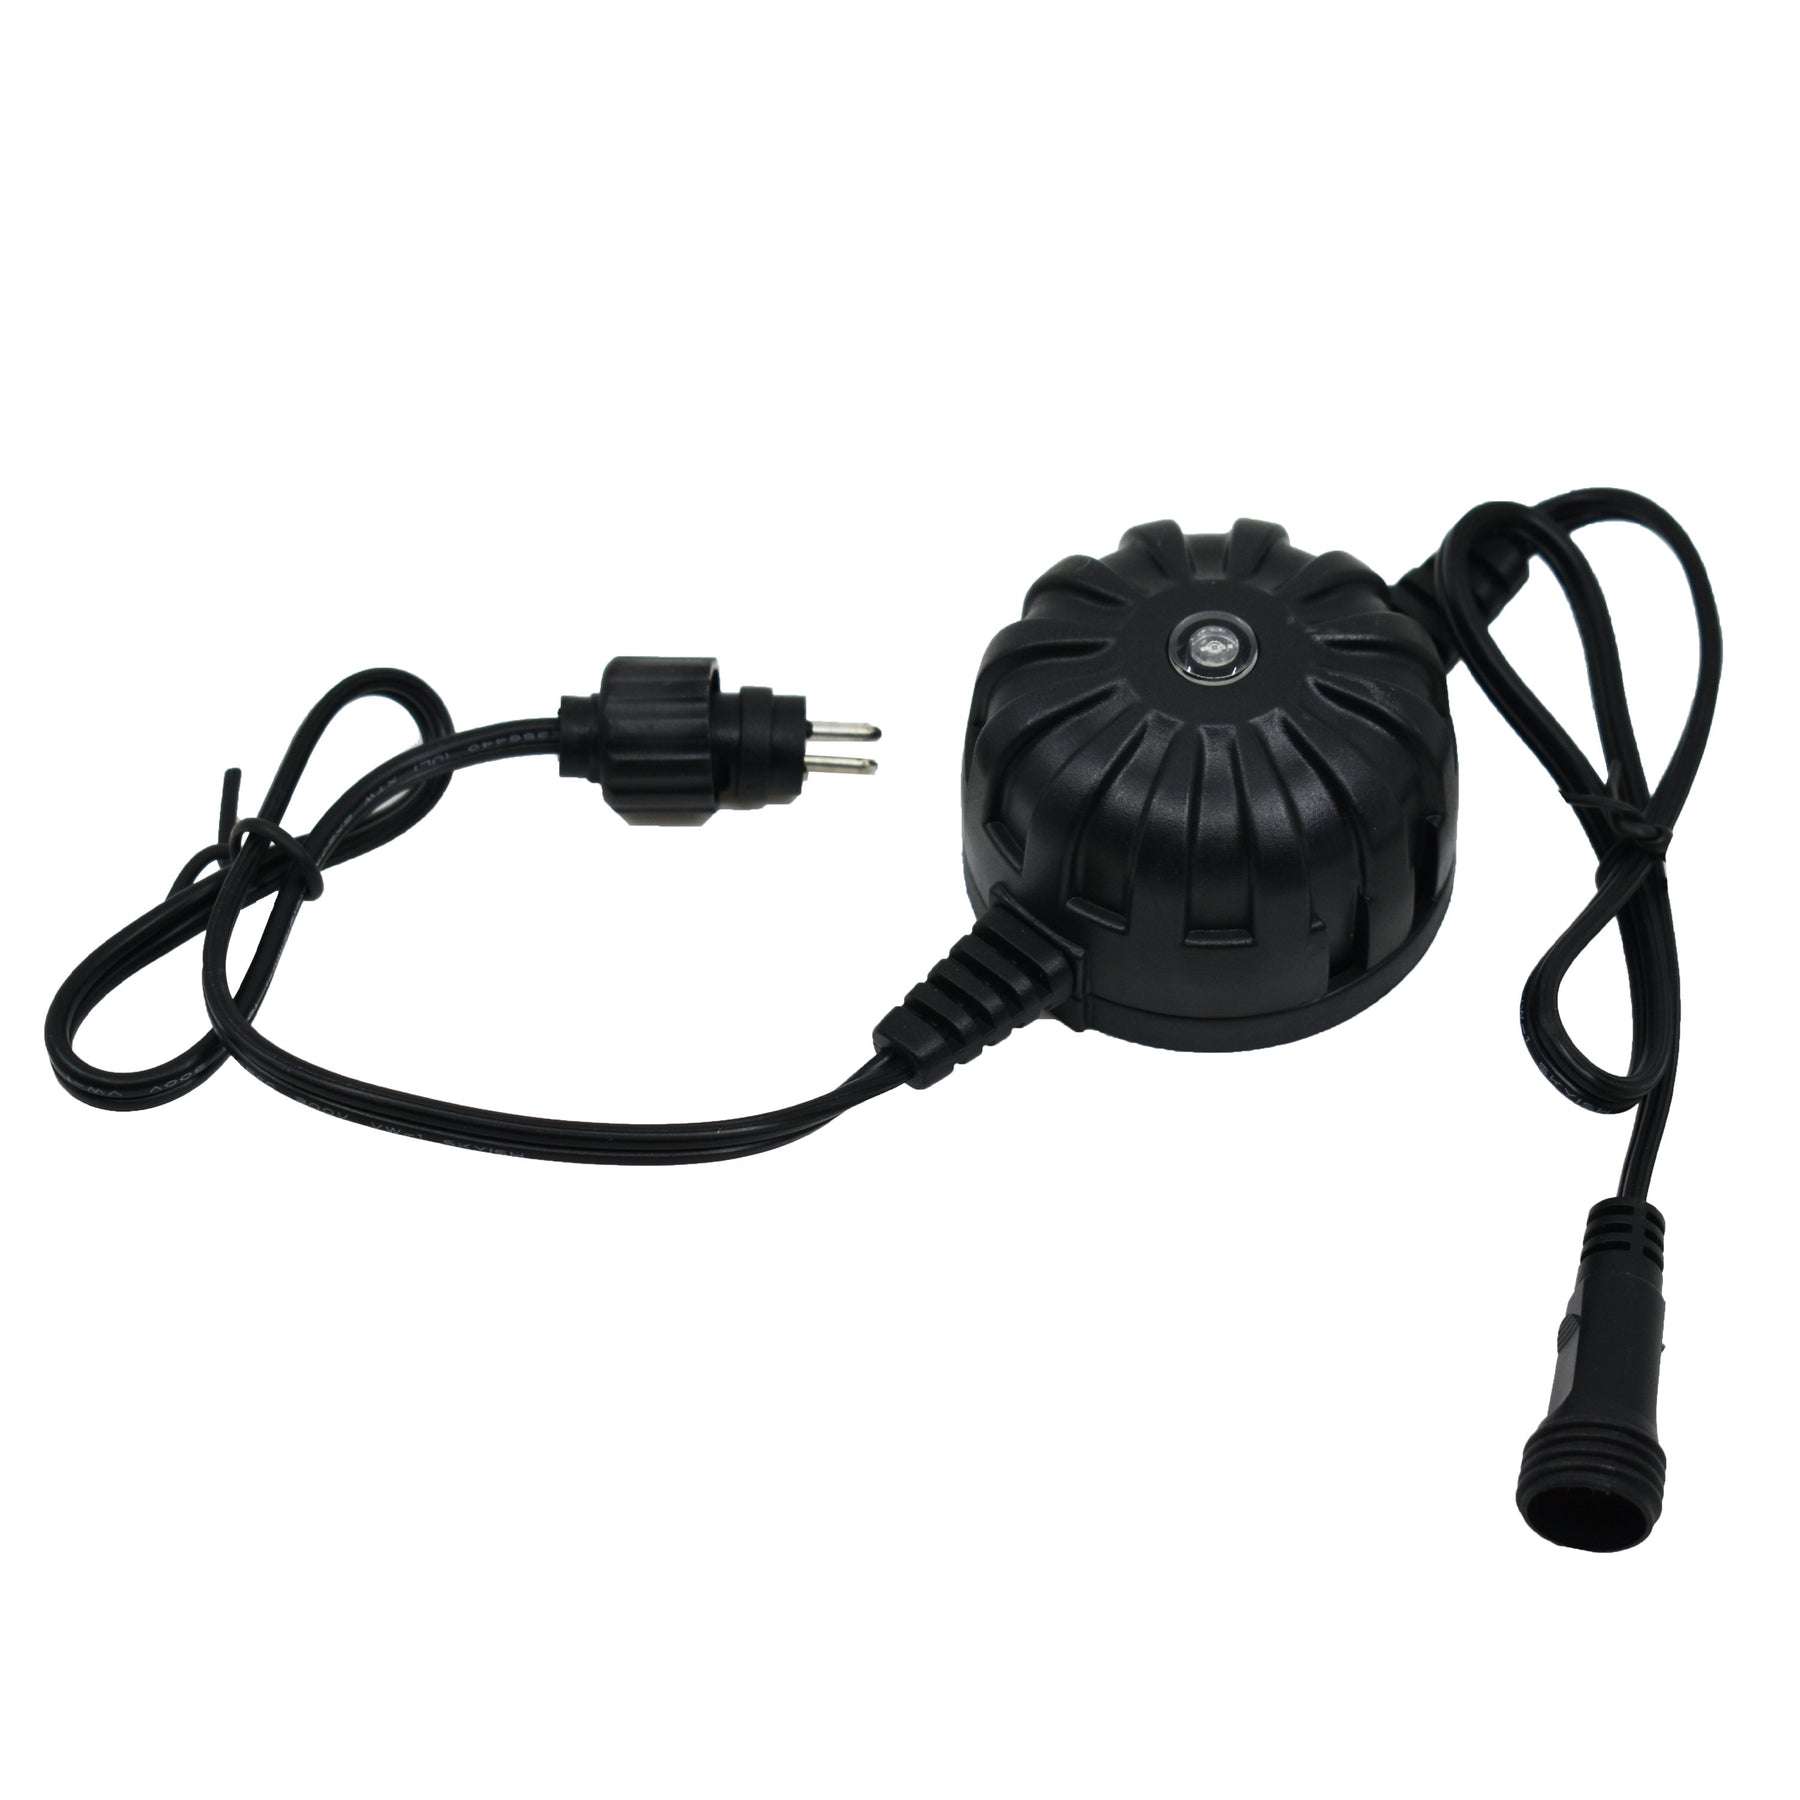 Dusk - To - Dawn Sensor For LunAqua Pond, Landscape Mini Lights and Floating Fountain With Lights 1 / 4 & 1 / 2 HP